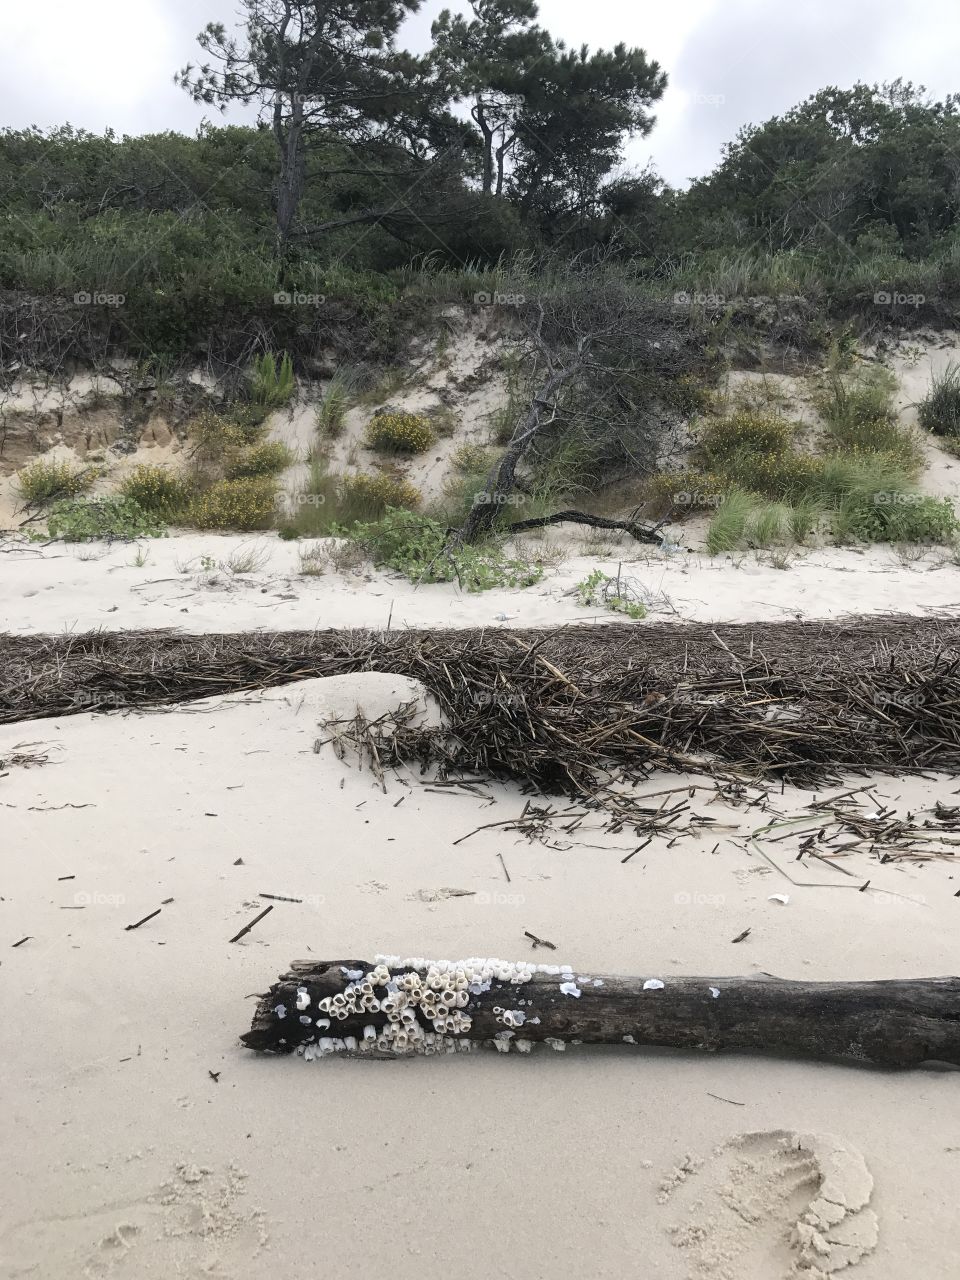 Driftwood in the wild.